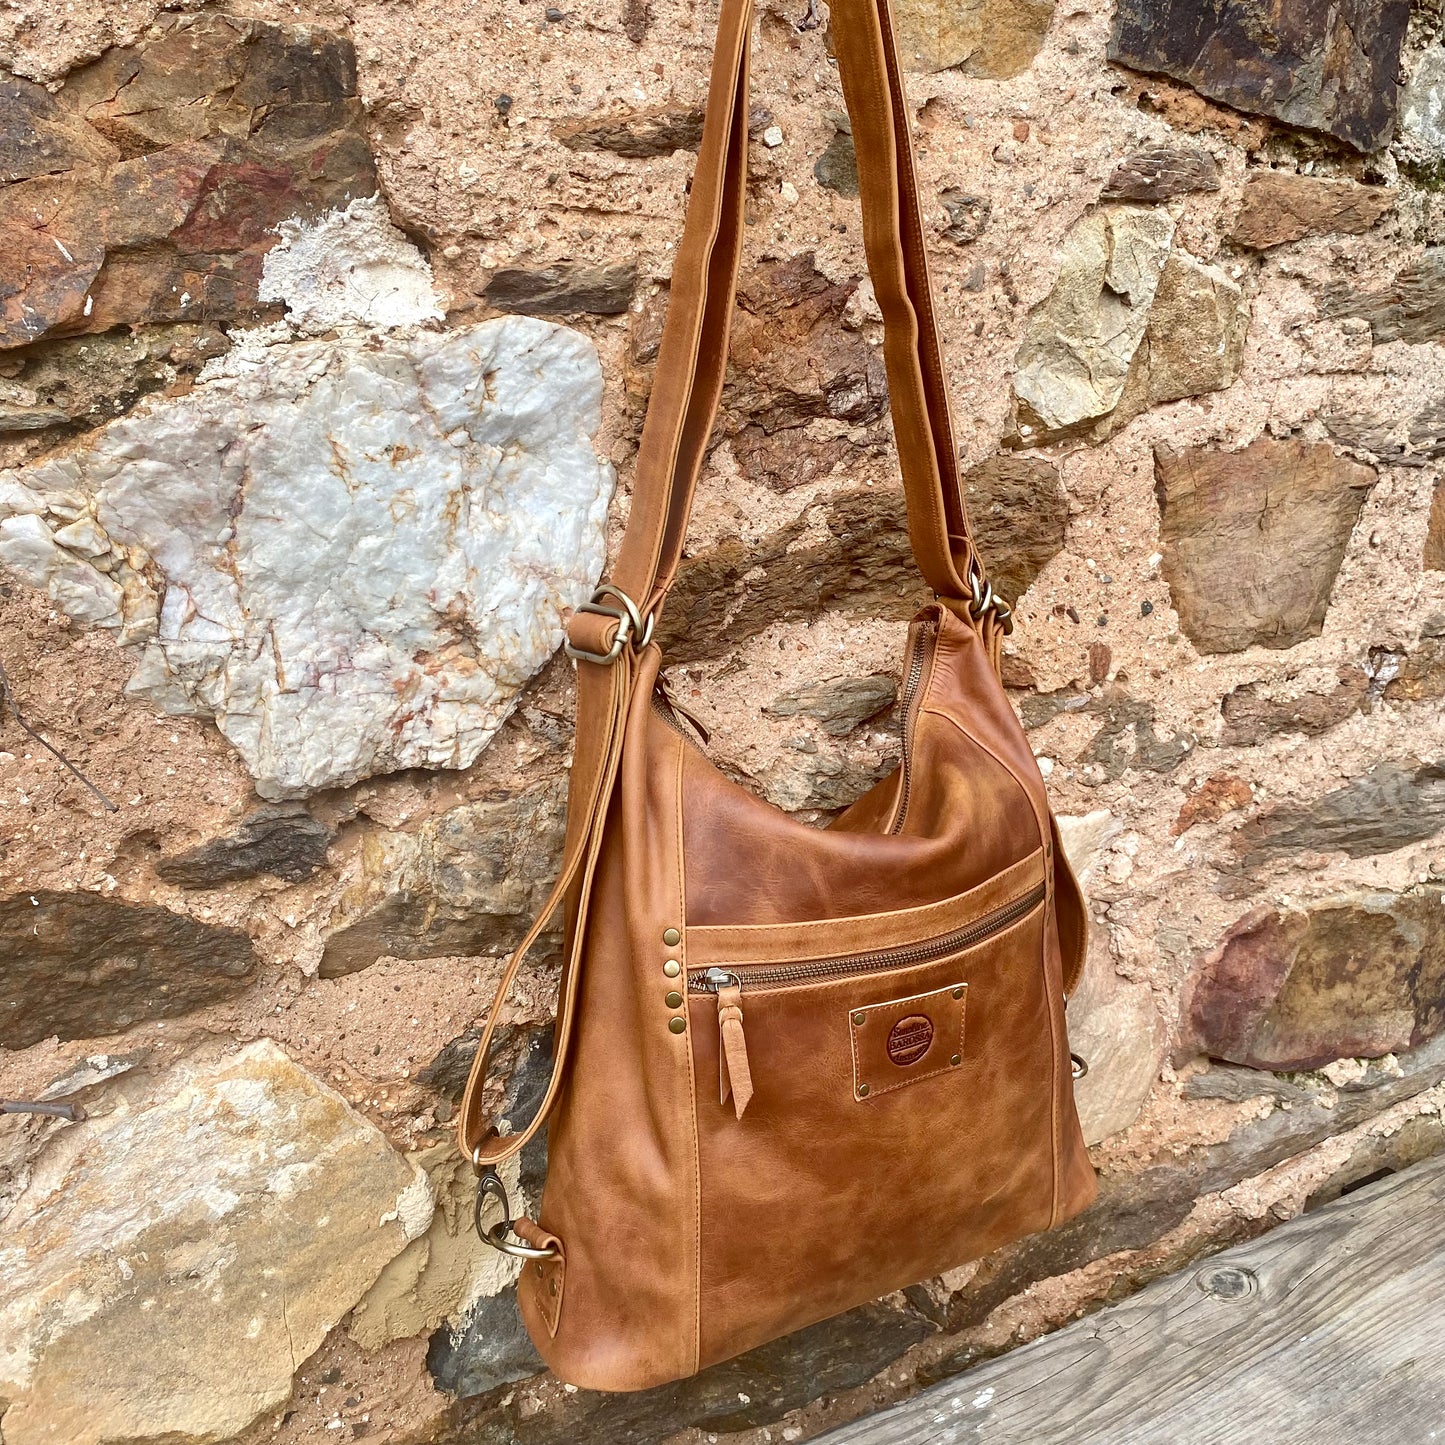 Convertible Leather Bag to Backpack